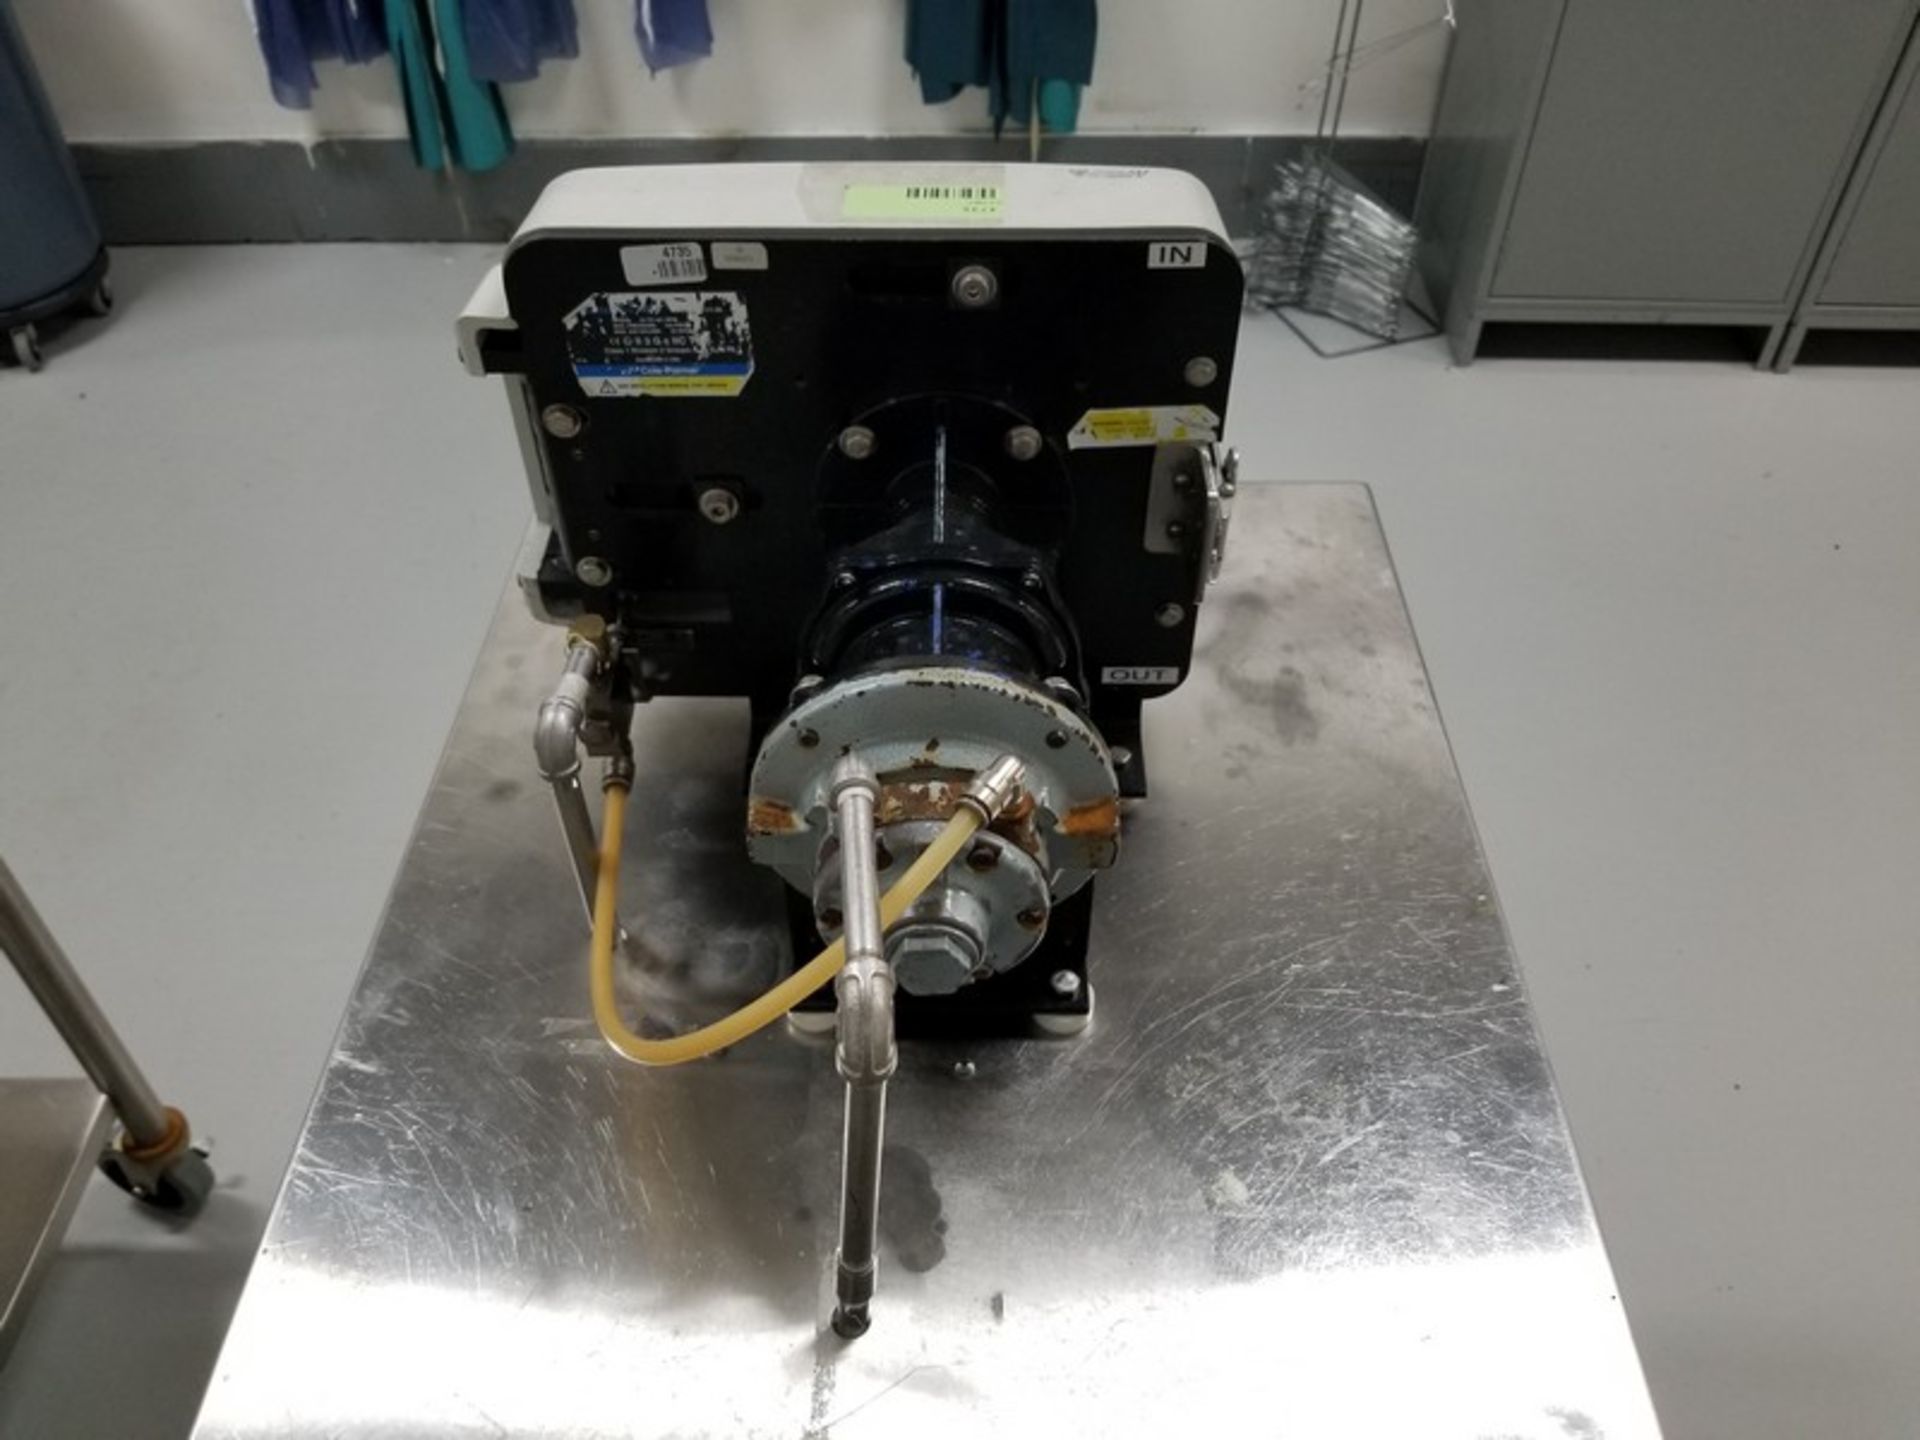 2 Cole-Parmer Masterflex B/T Peristaltic Pumps mounted on Stainless Tables Air operated "as-is" S# - Image 3 of 9